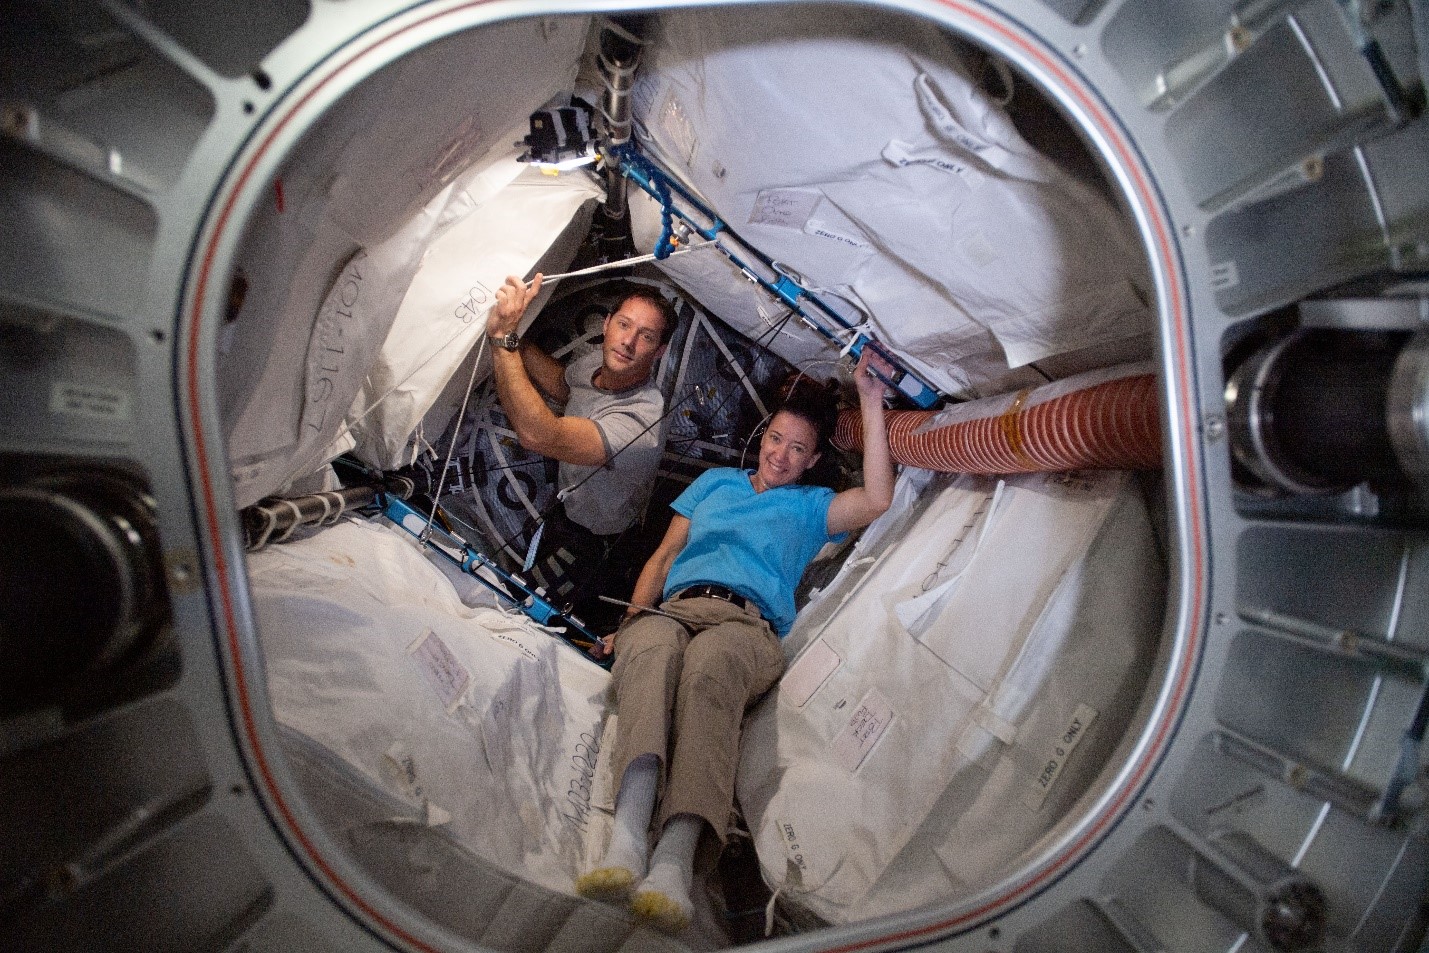 Thomas Pesquet from ESA and Megan McArthur from NASA inside BEAM, the Bigelow Expandable Activity Module.